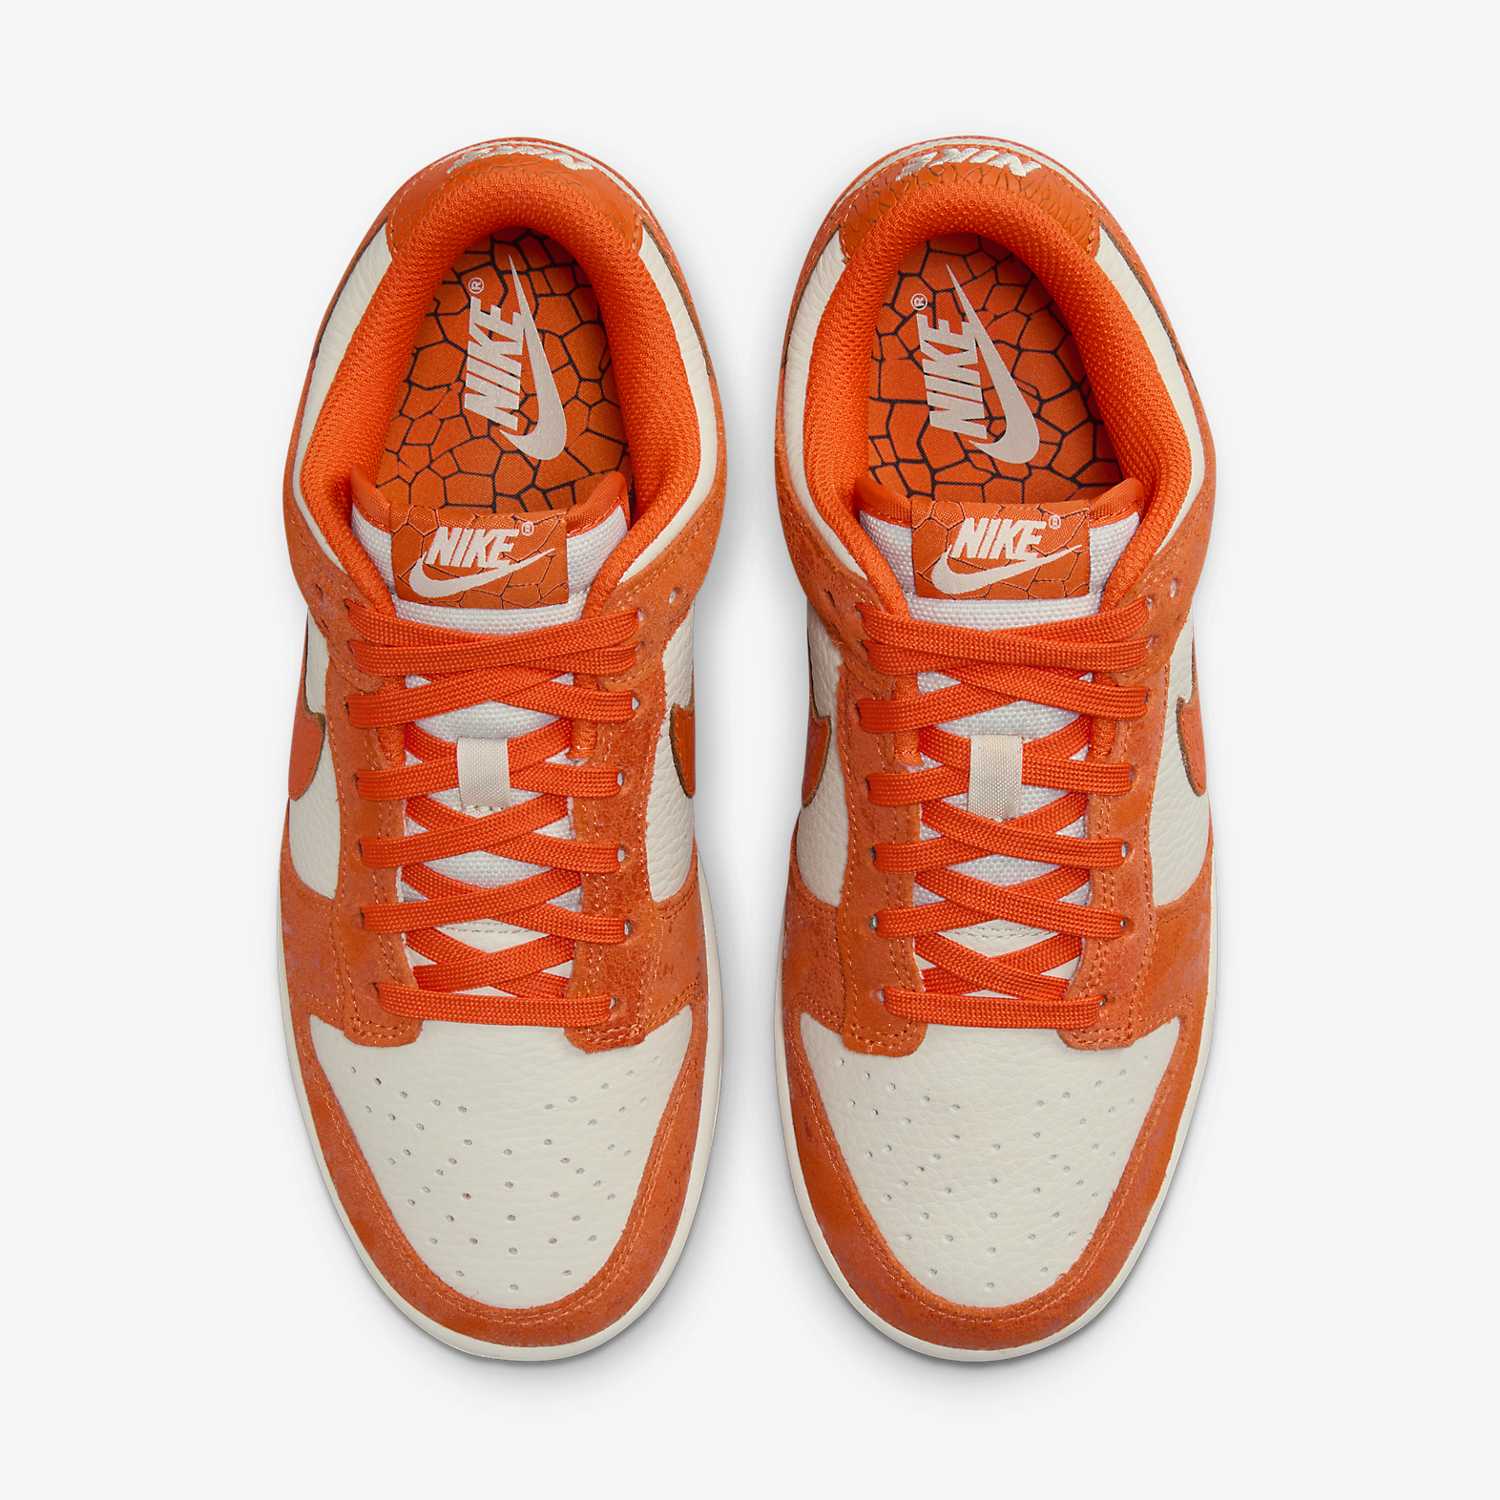 Available tomorrow the Nike Dunk Low “Total Orange” WMNS draws